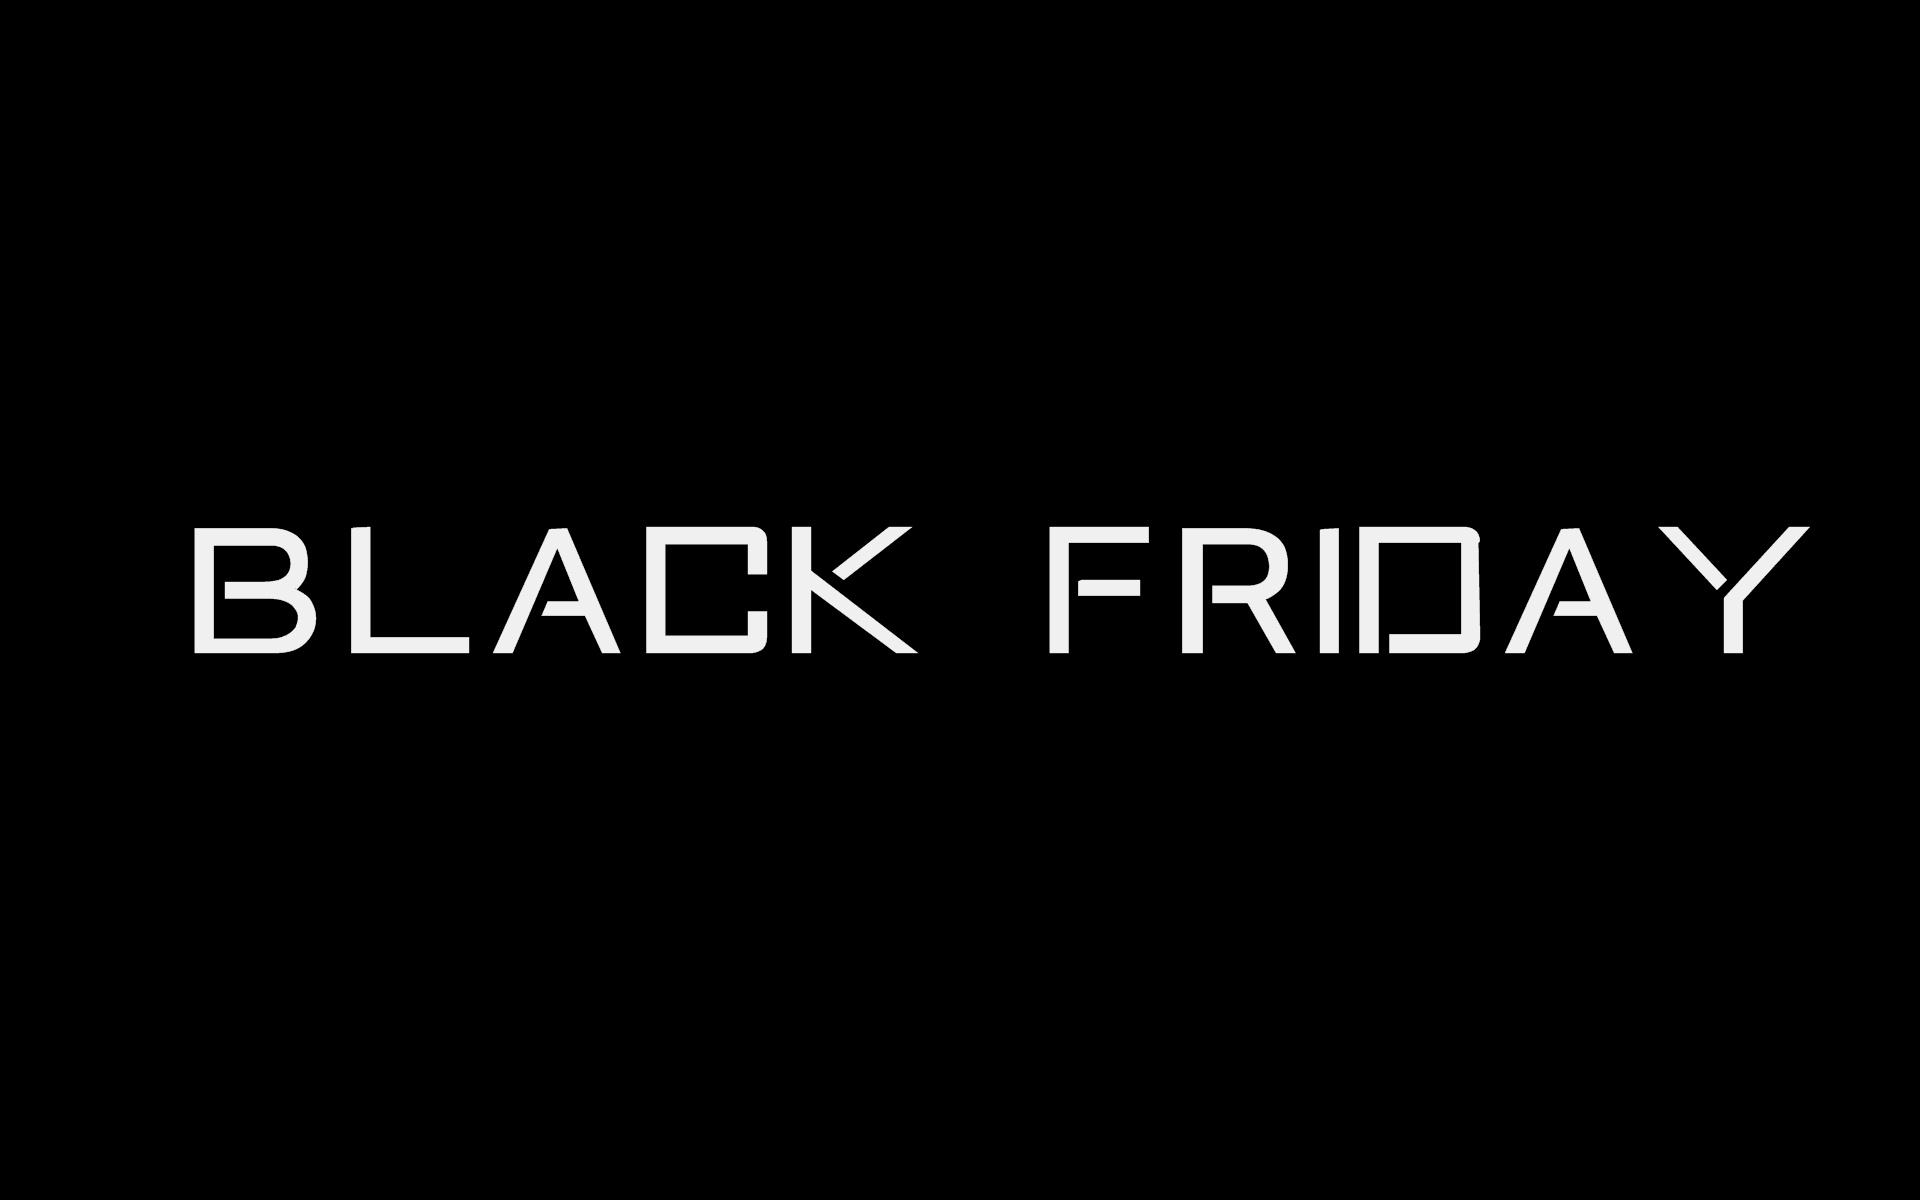 Black Friday Wishes Wallpaper